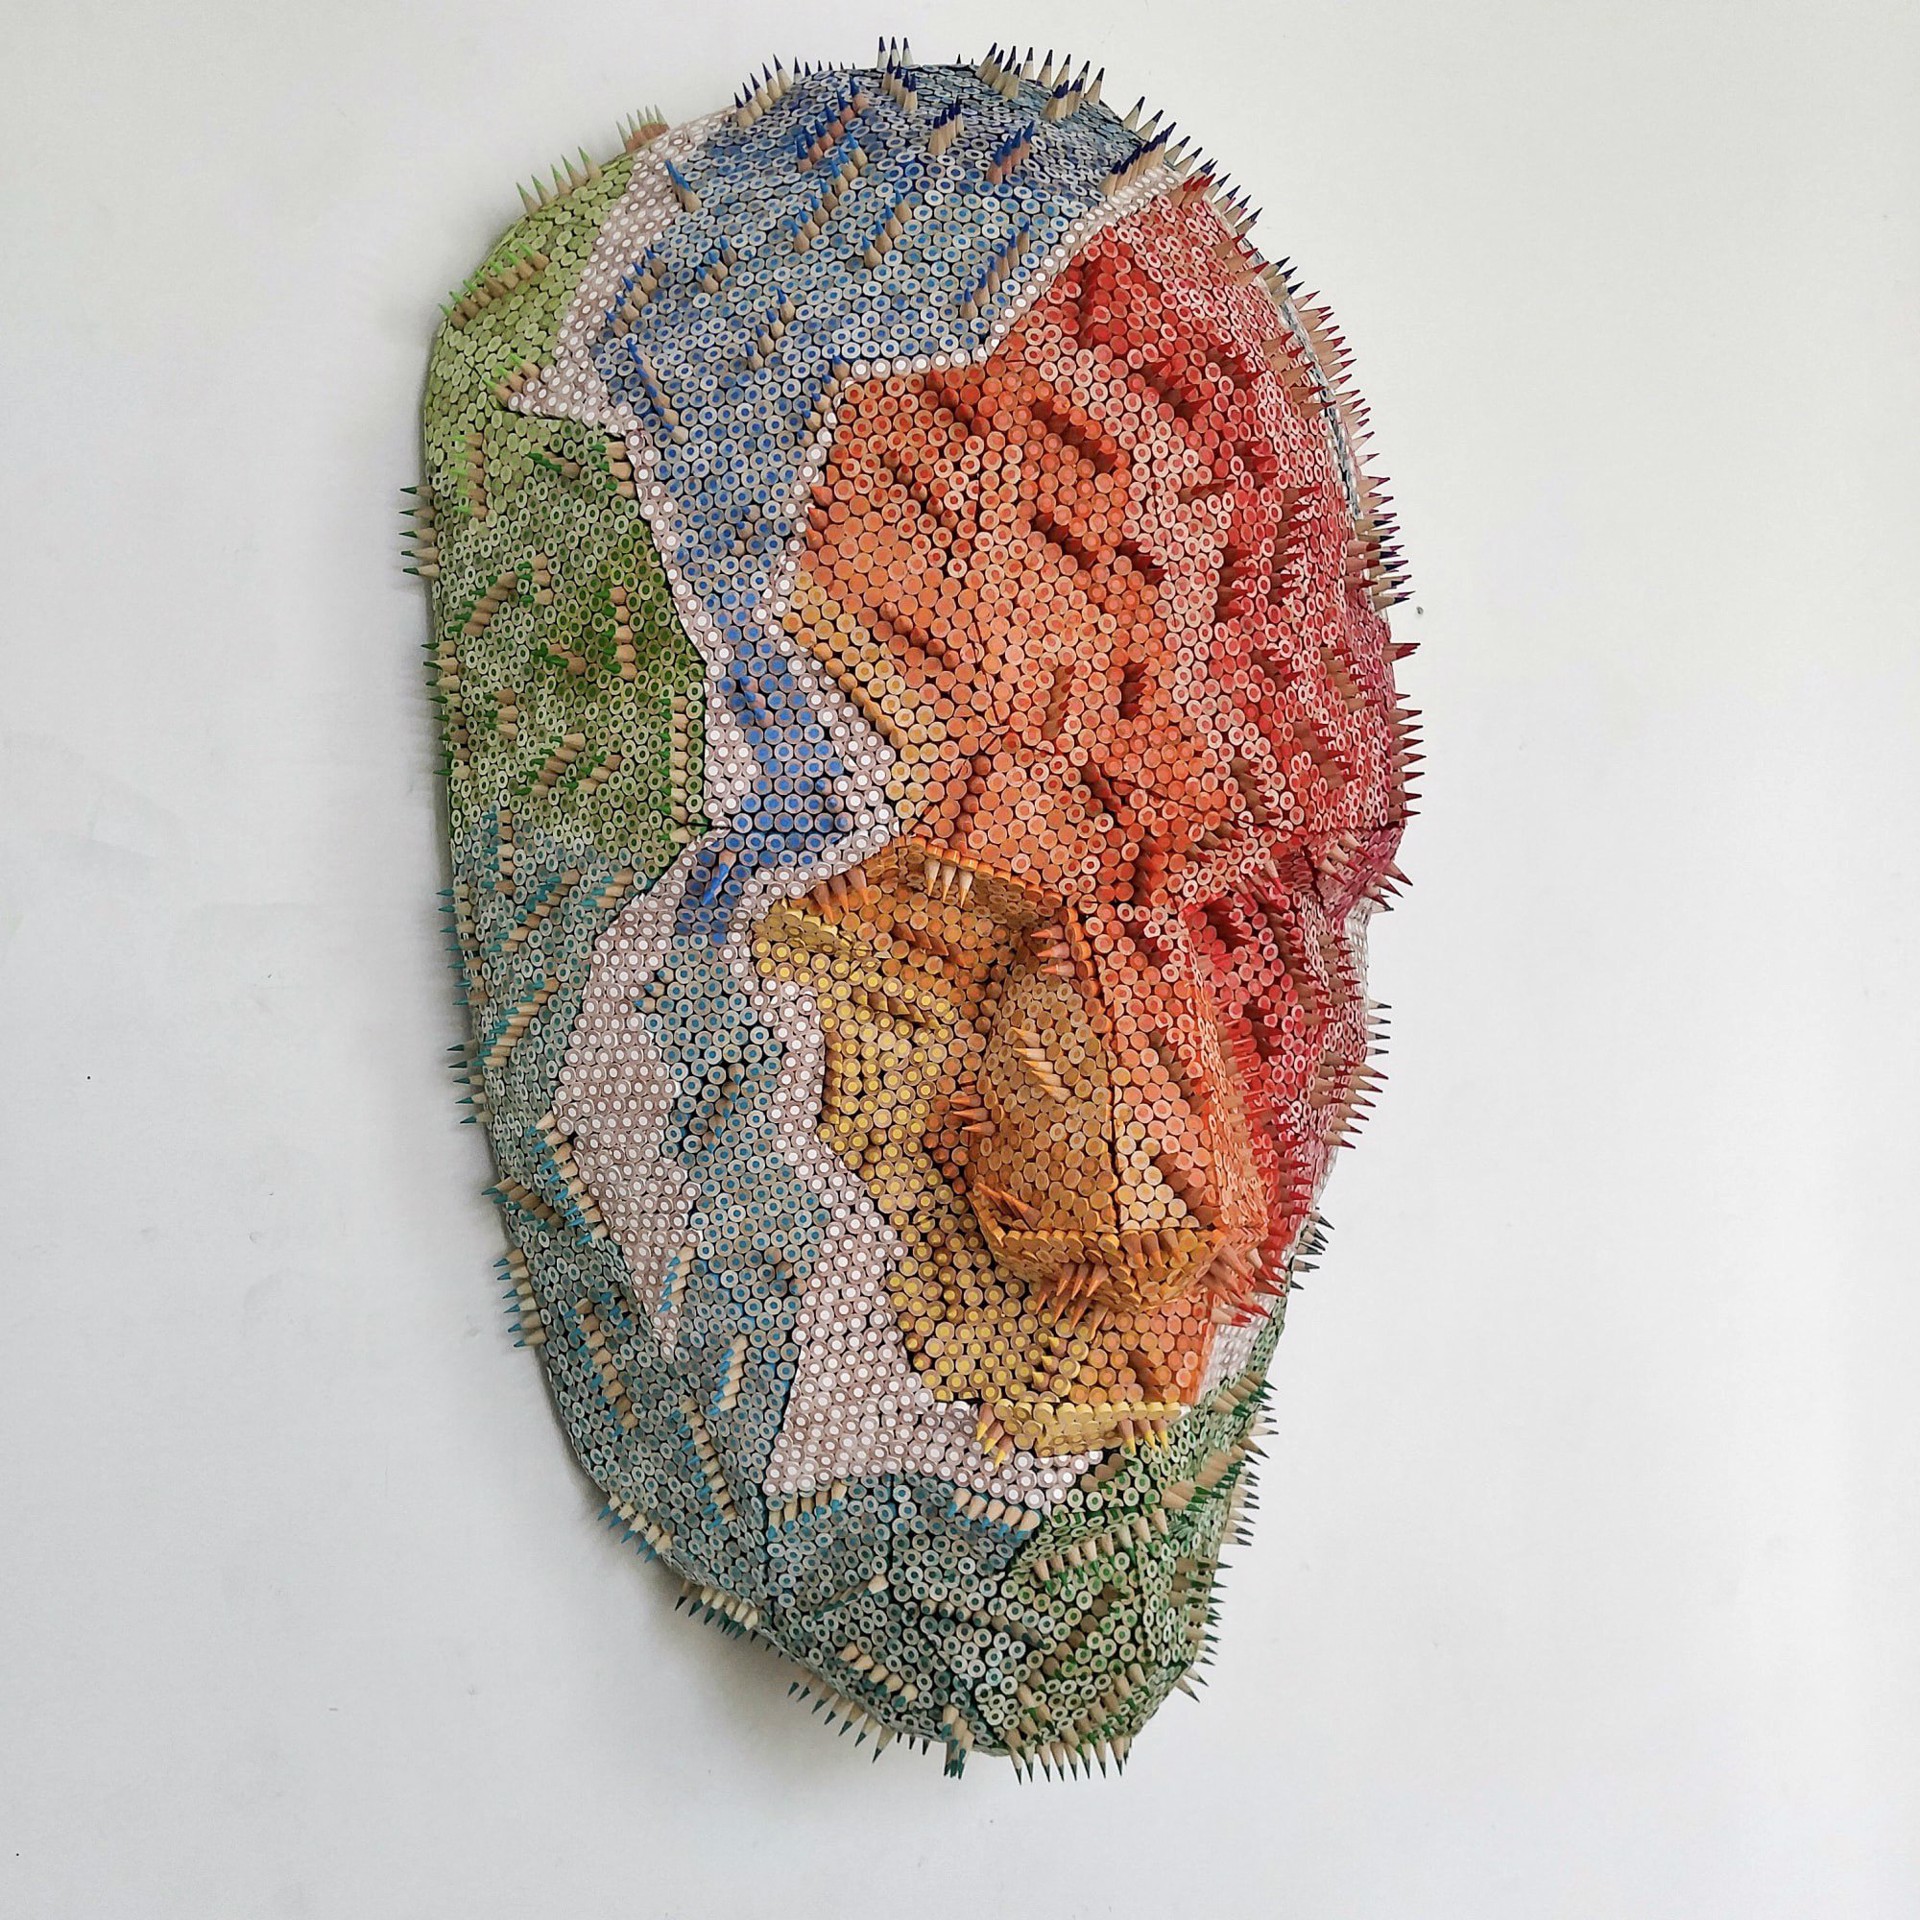 Face of the Earth by Molly Gambardella